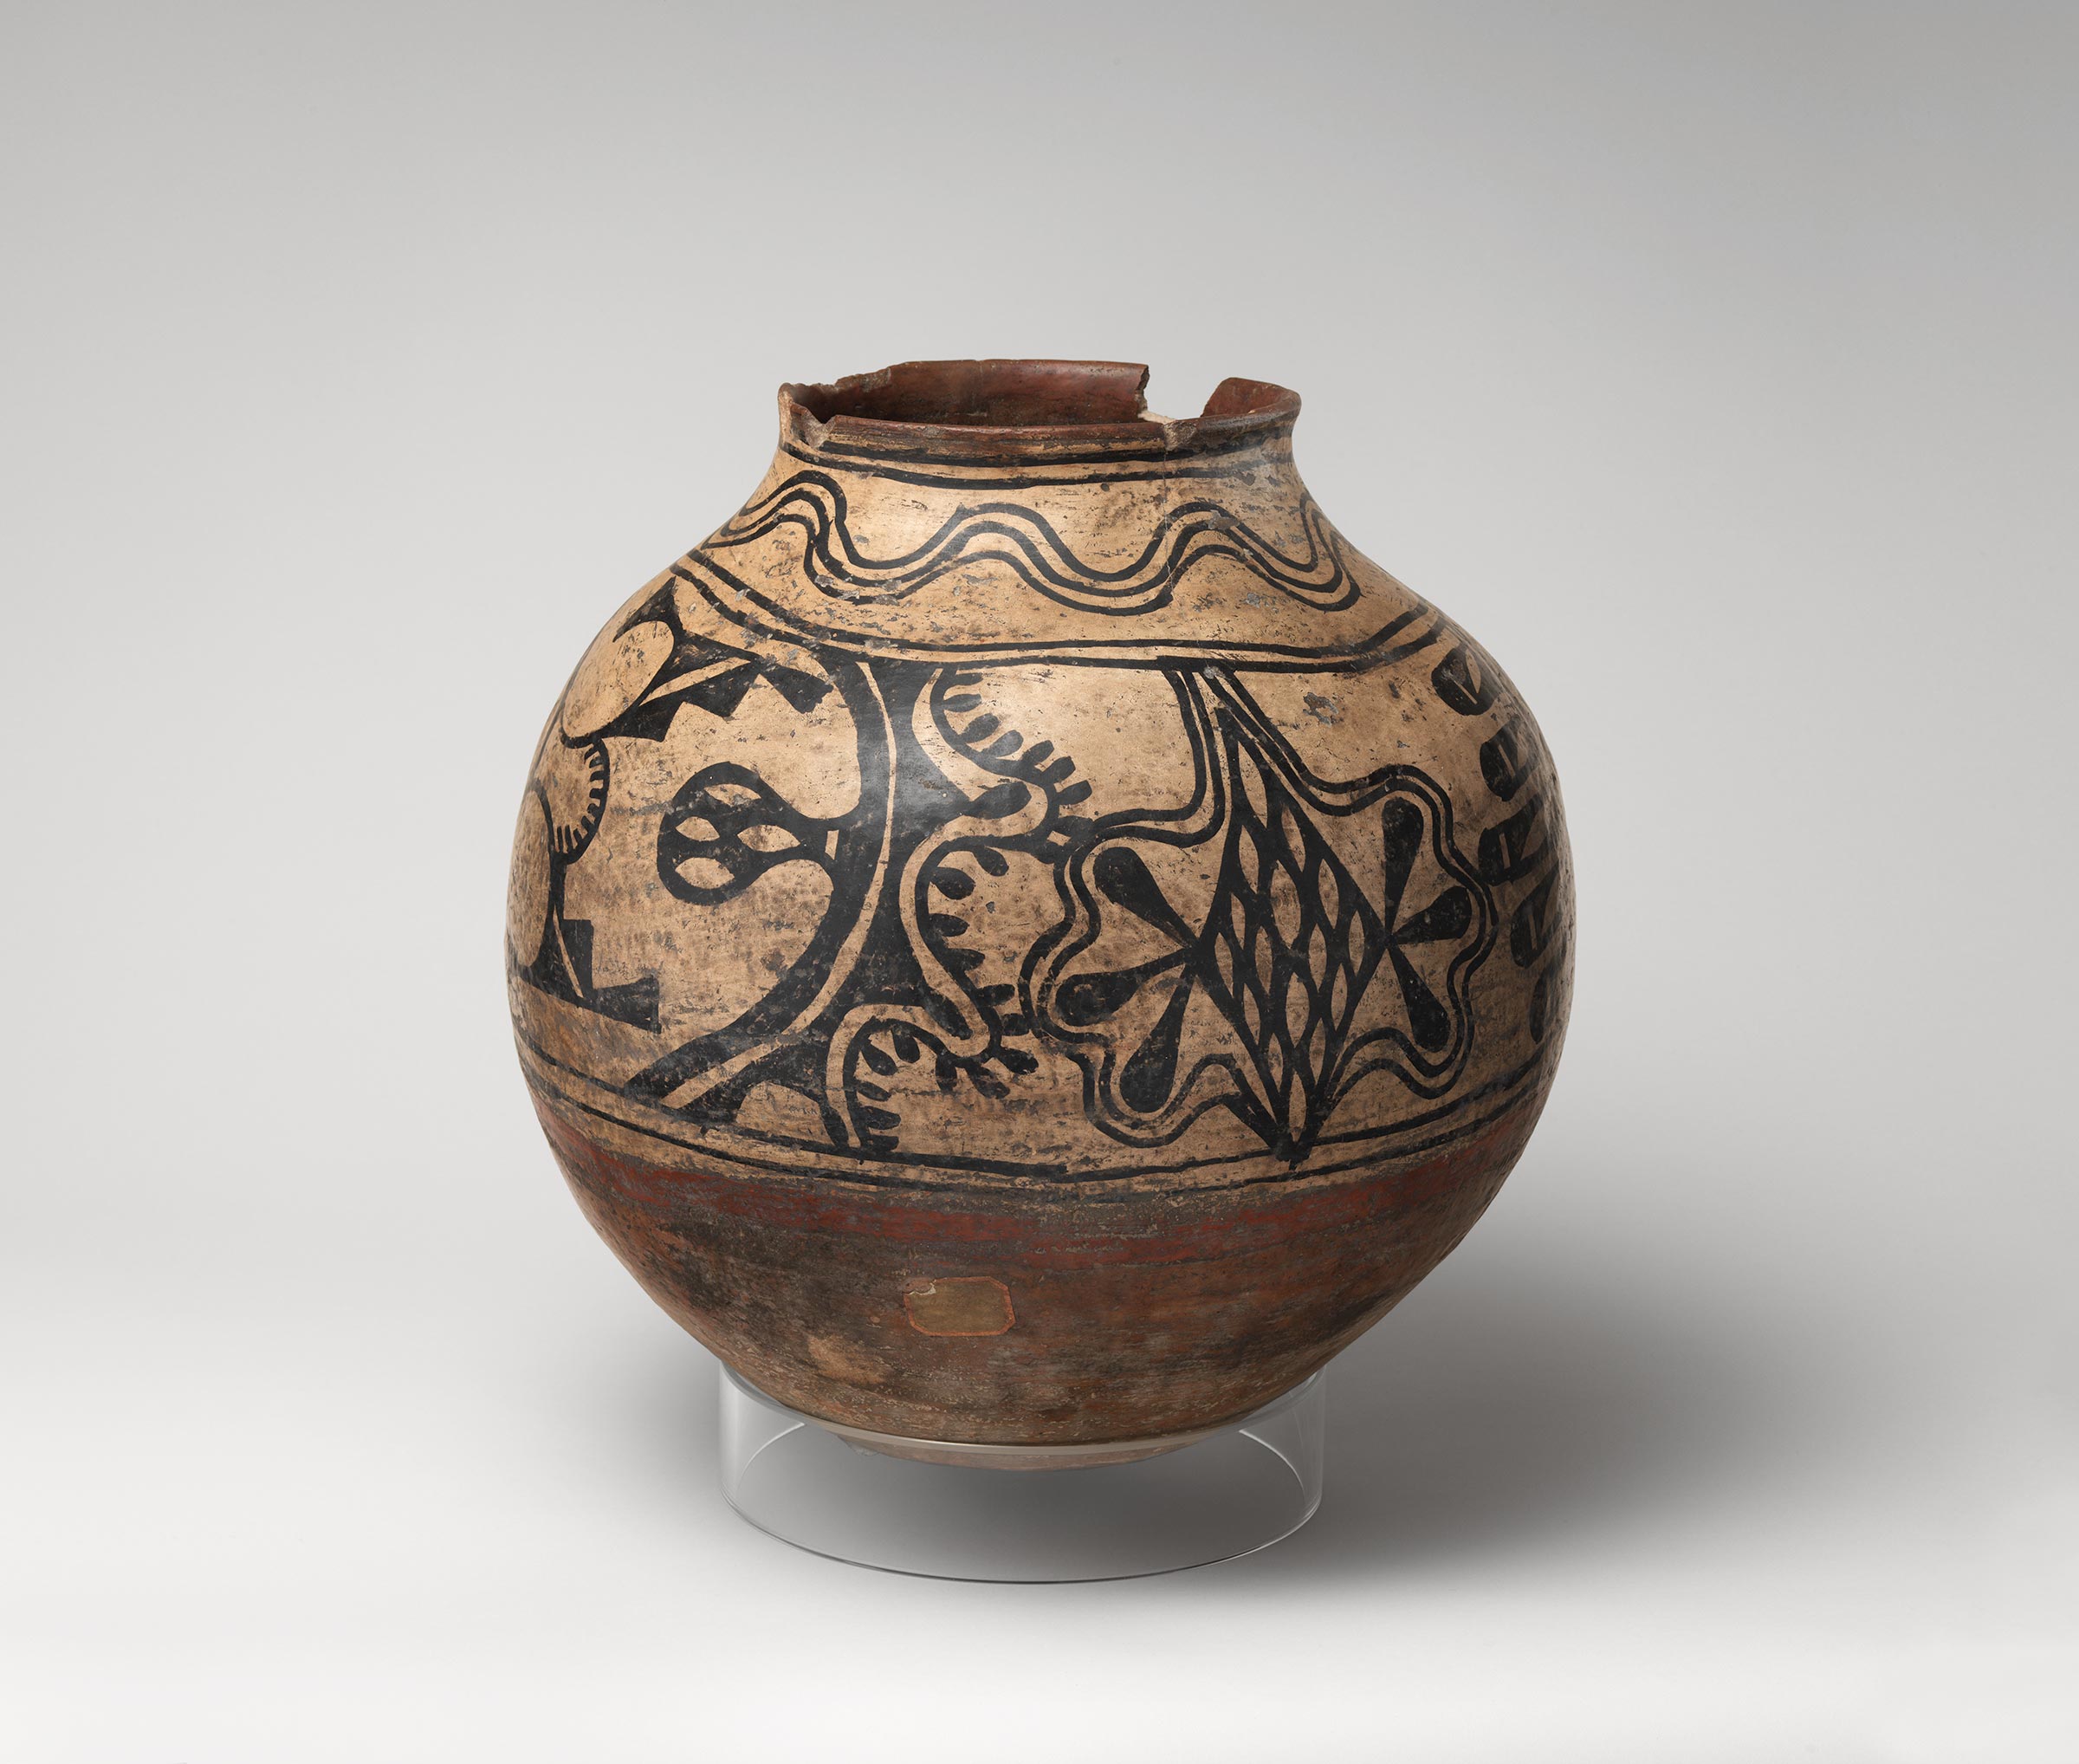 Cochiti polychrome storage jar featuring white slip with black and red painted decoration.